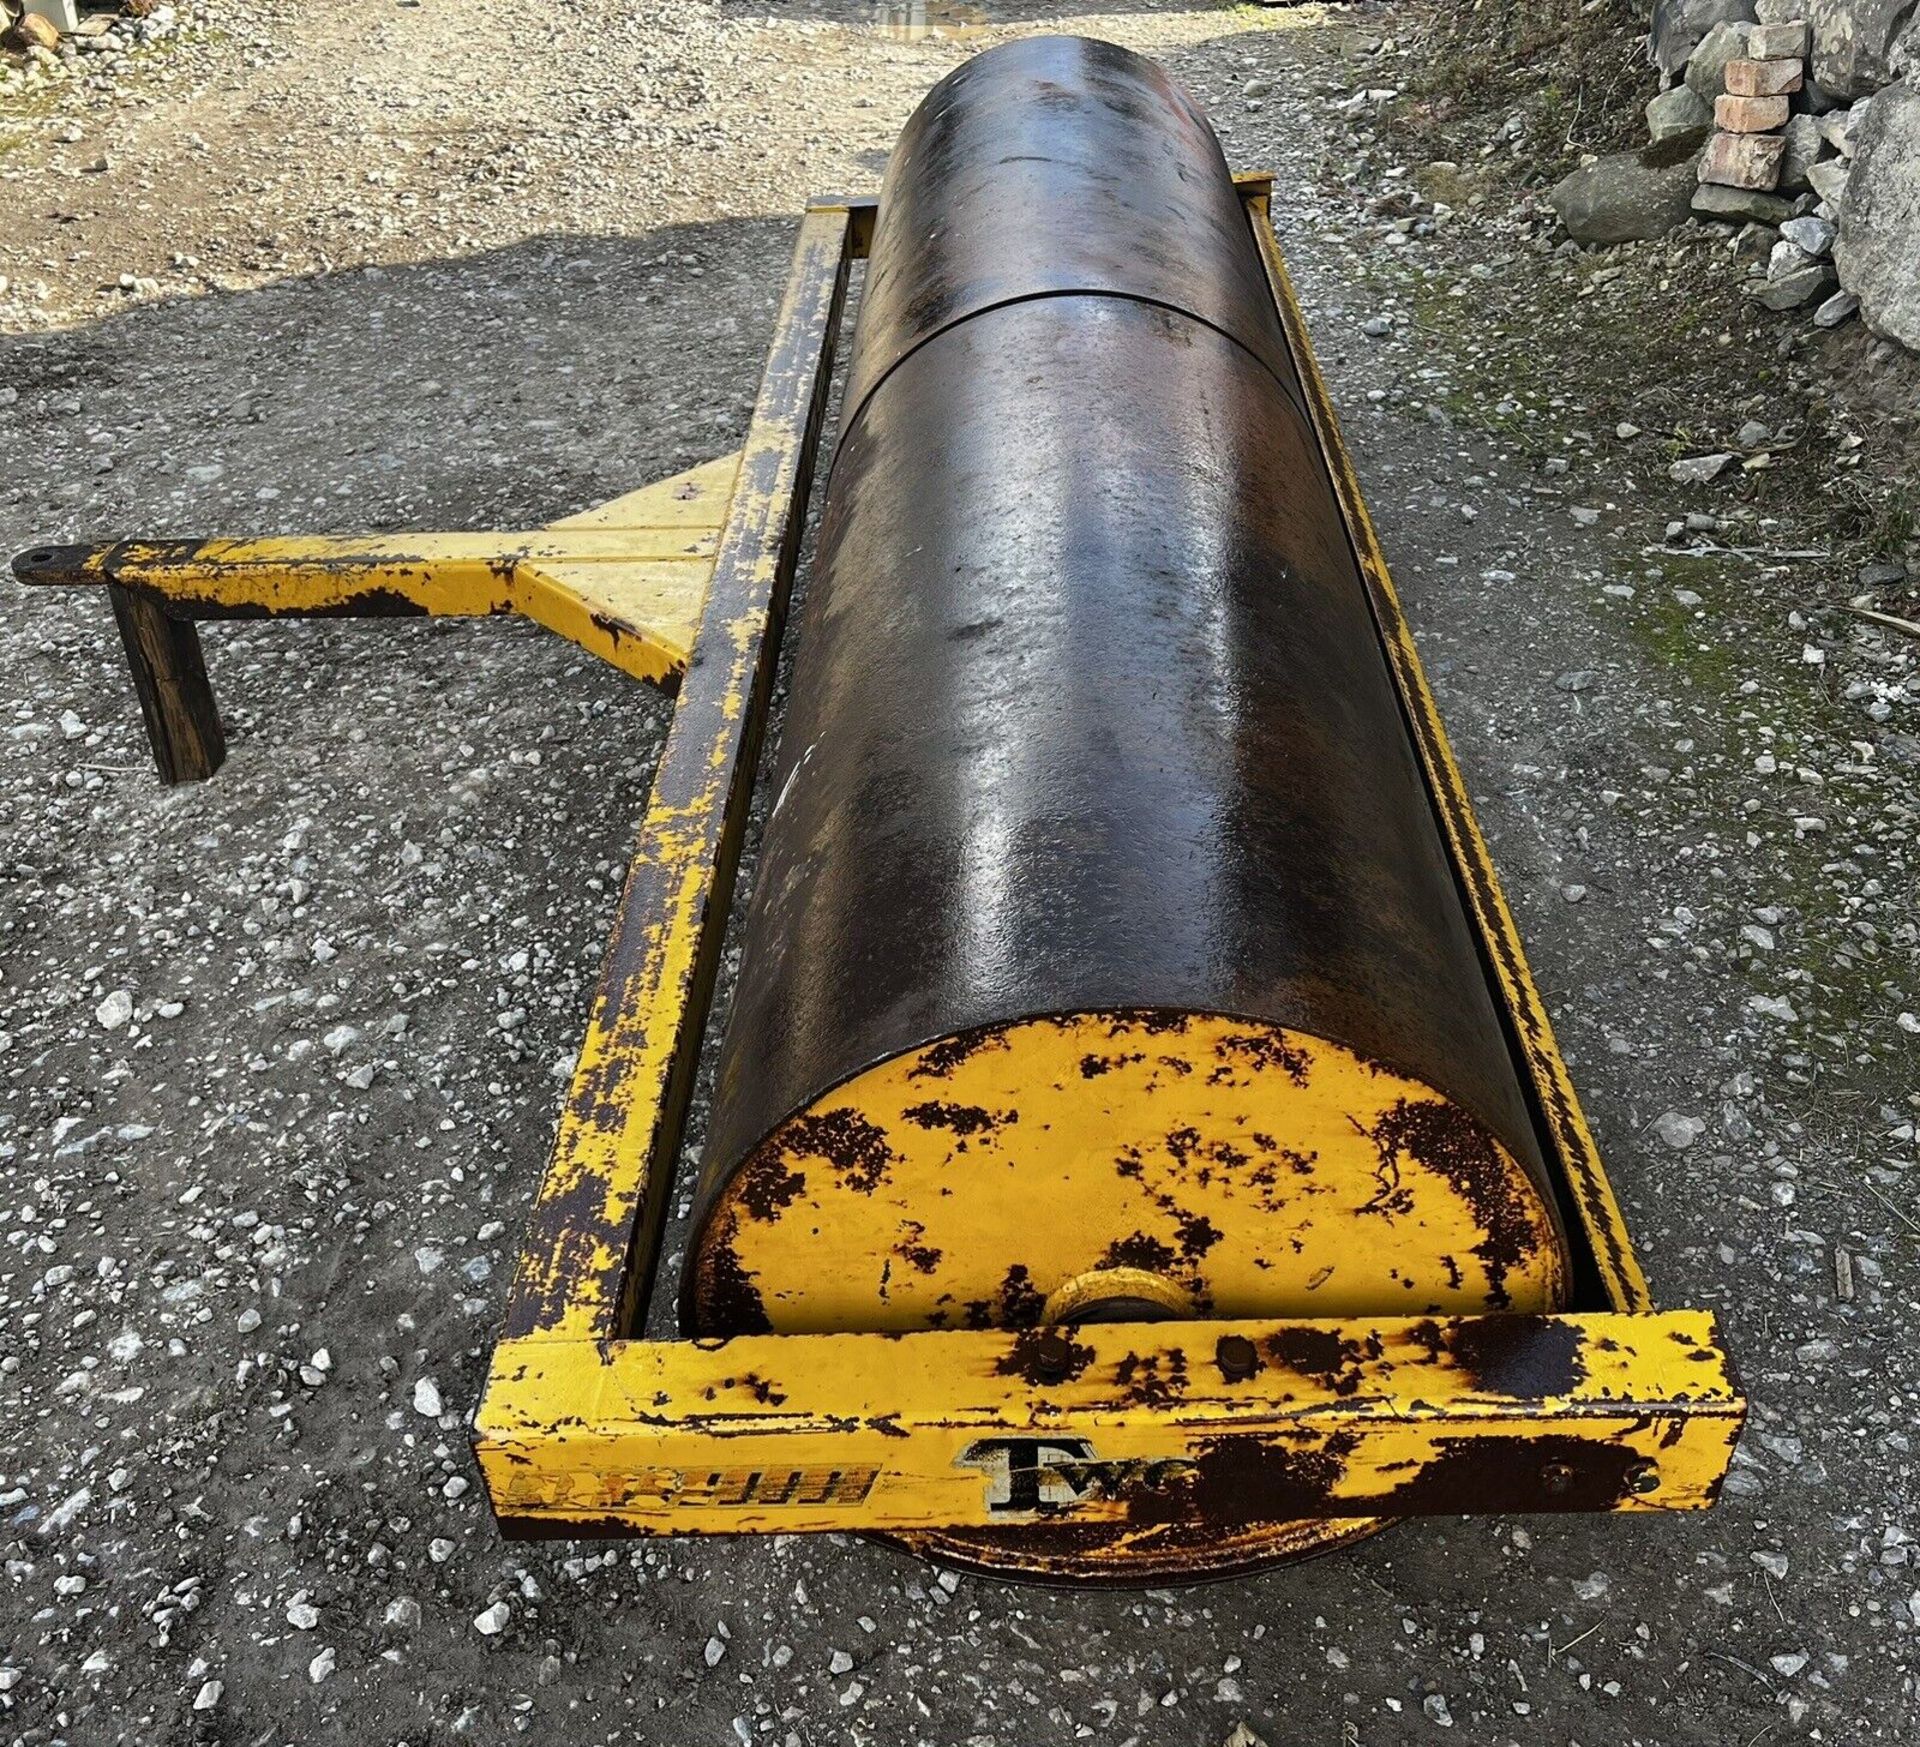 TWOSE 10 FT BALLAST ROLLER: RELIABLE USE